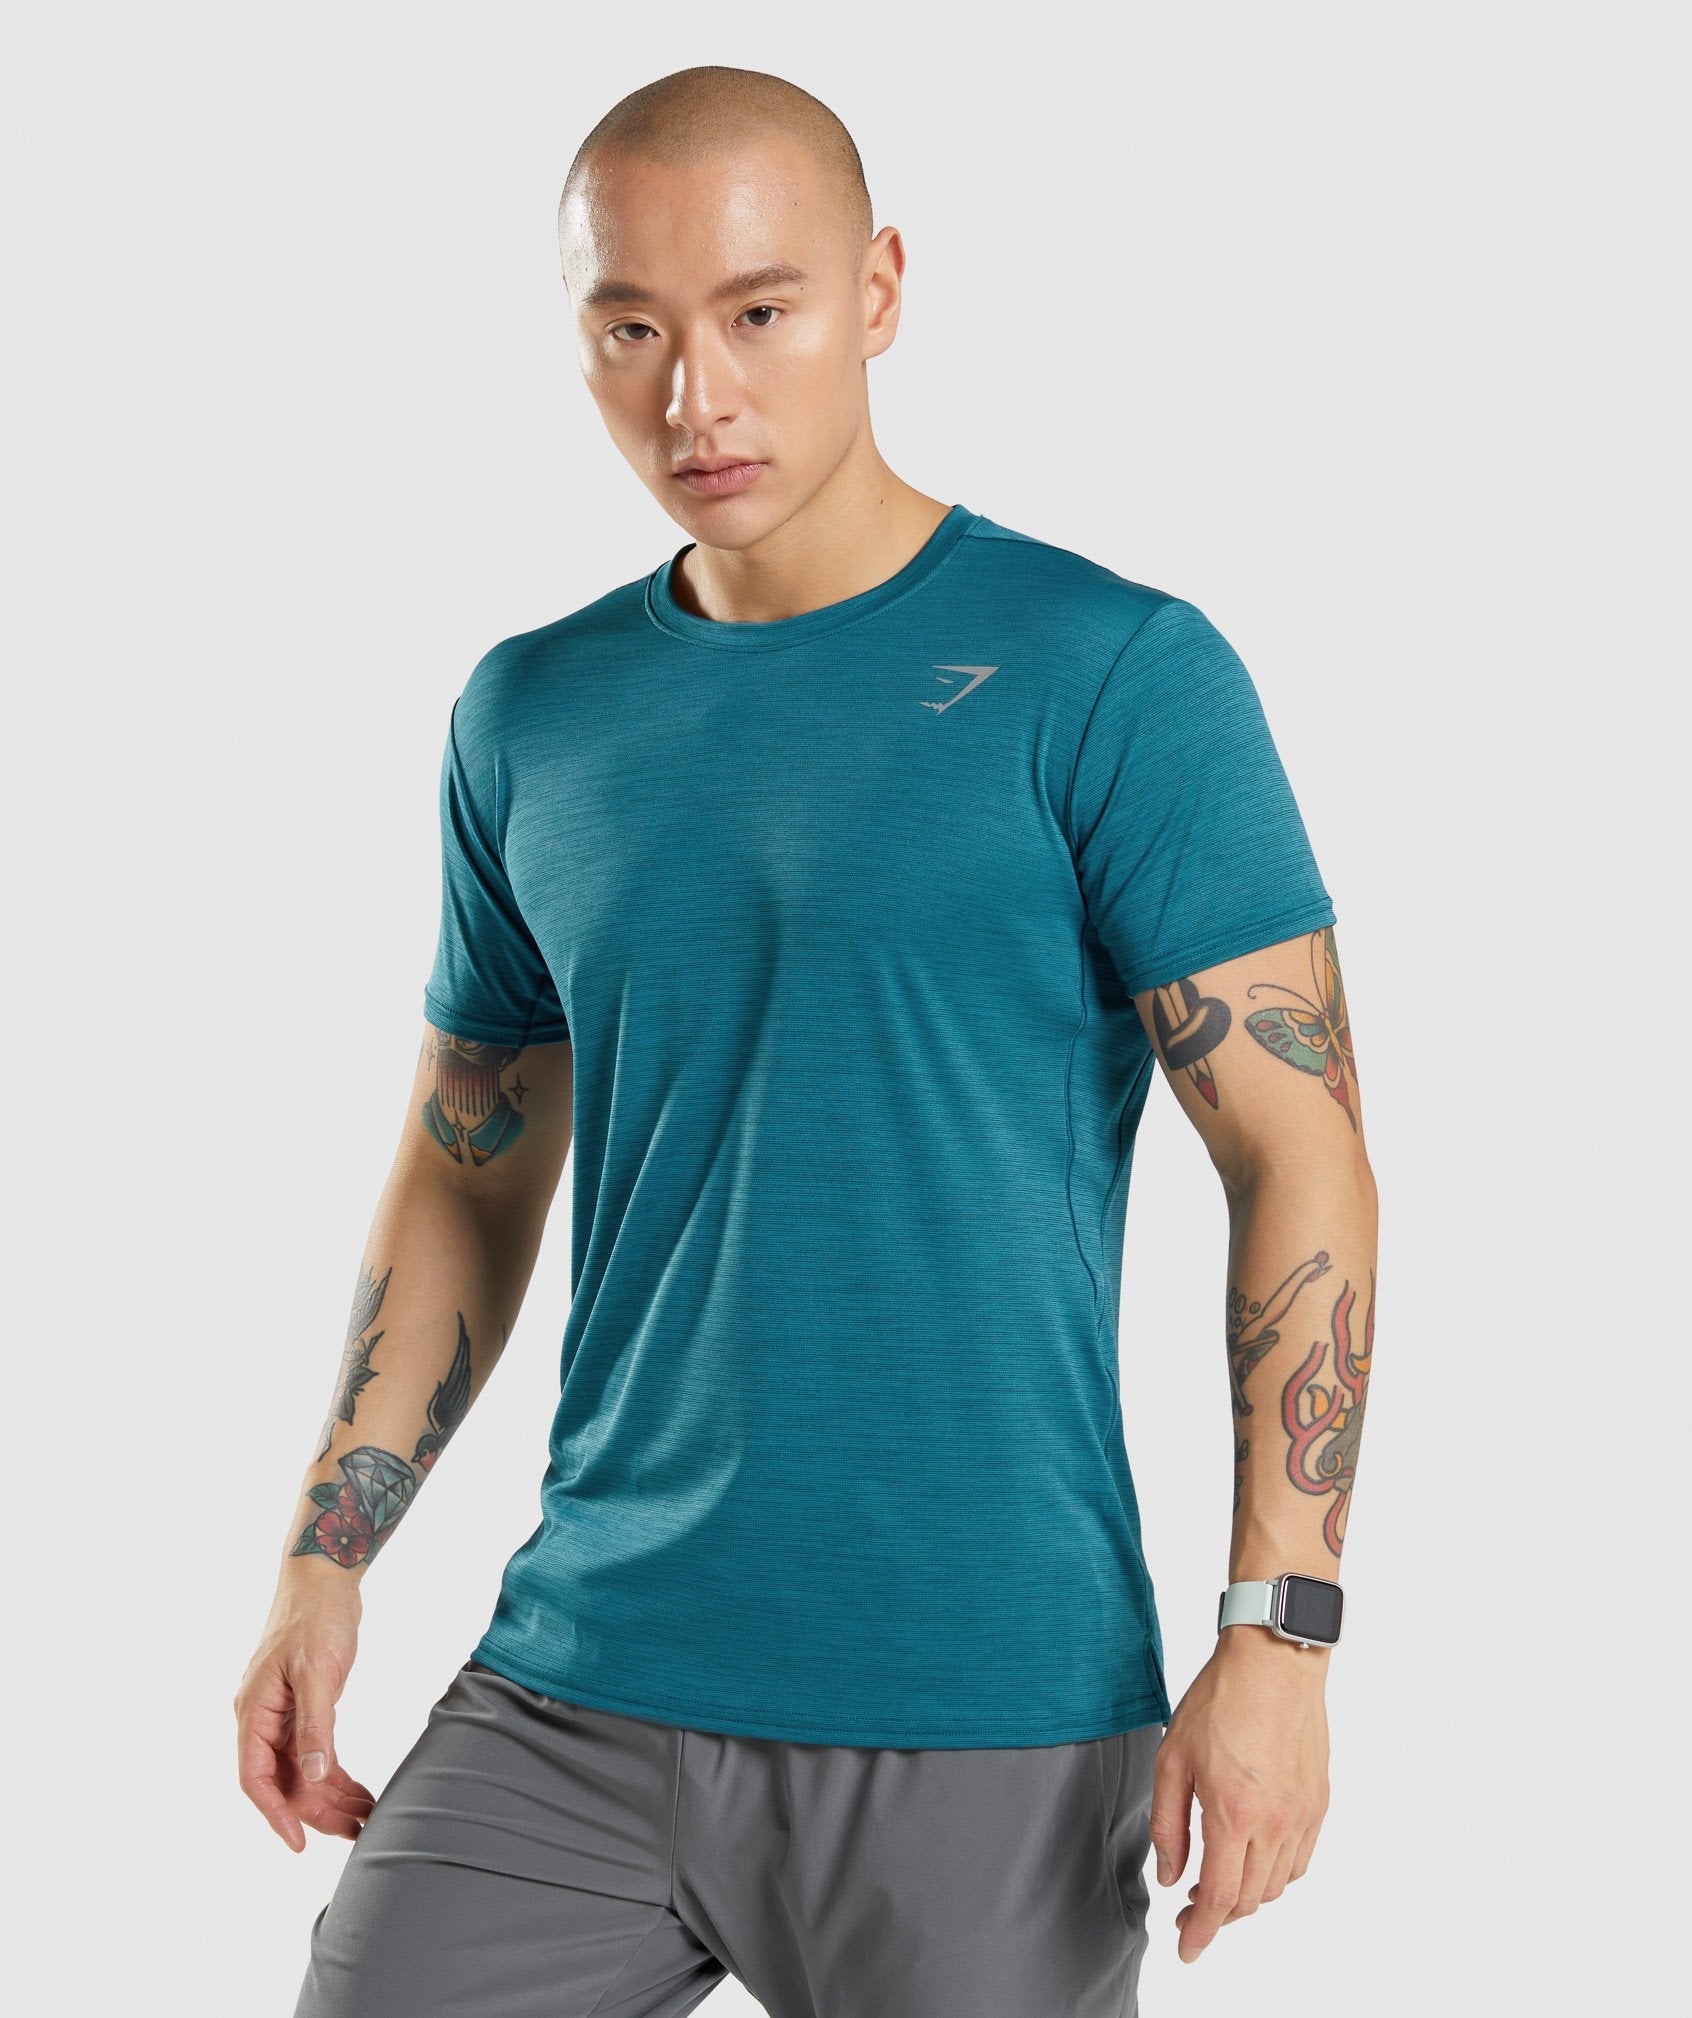 Speed T-Shirt in Teal/Teal Marl - view 1